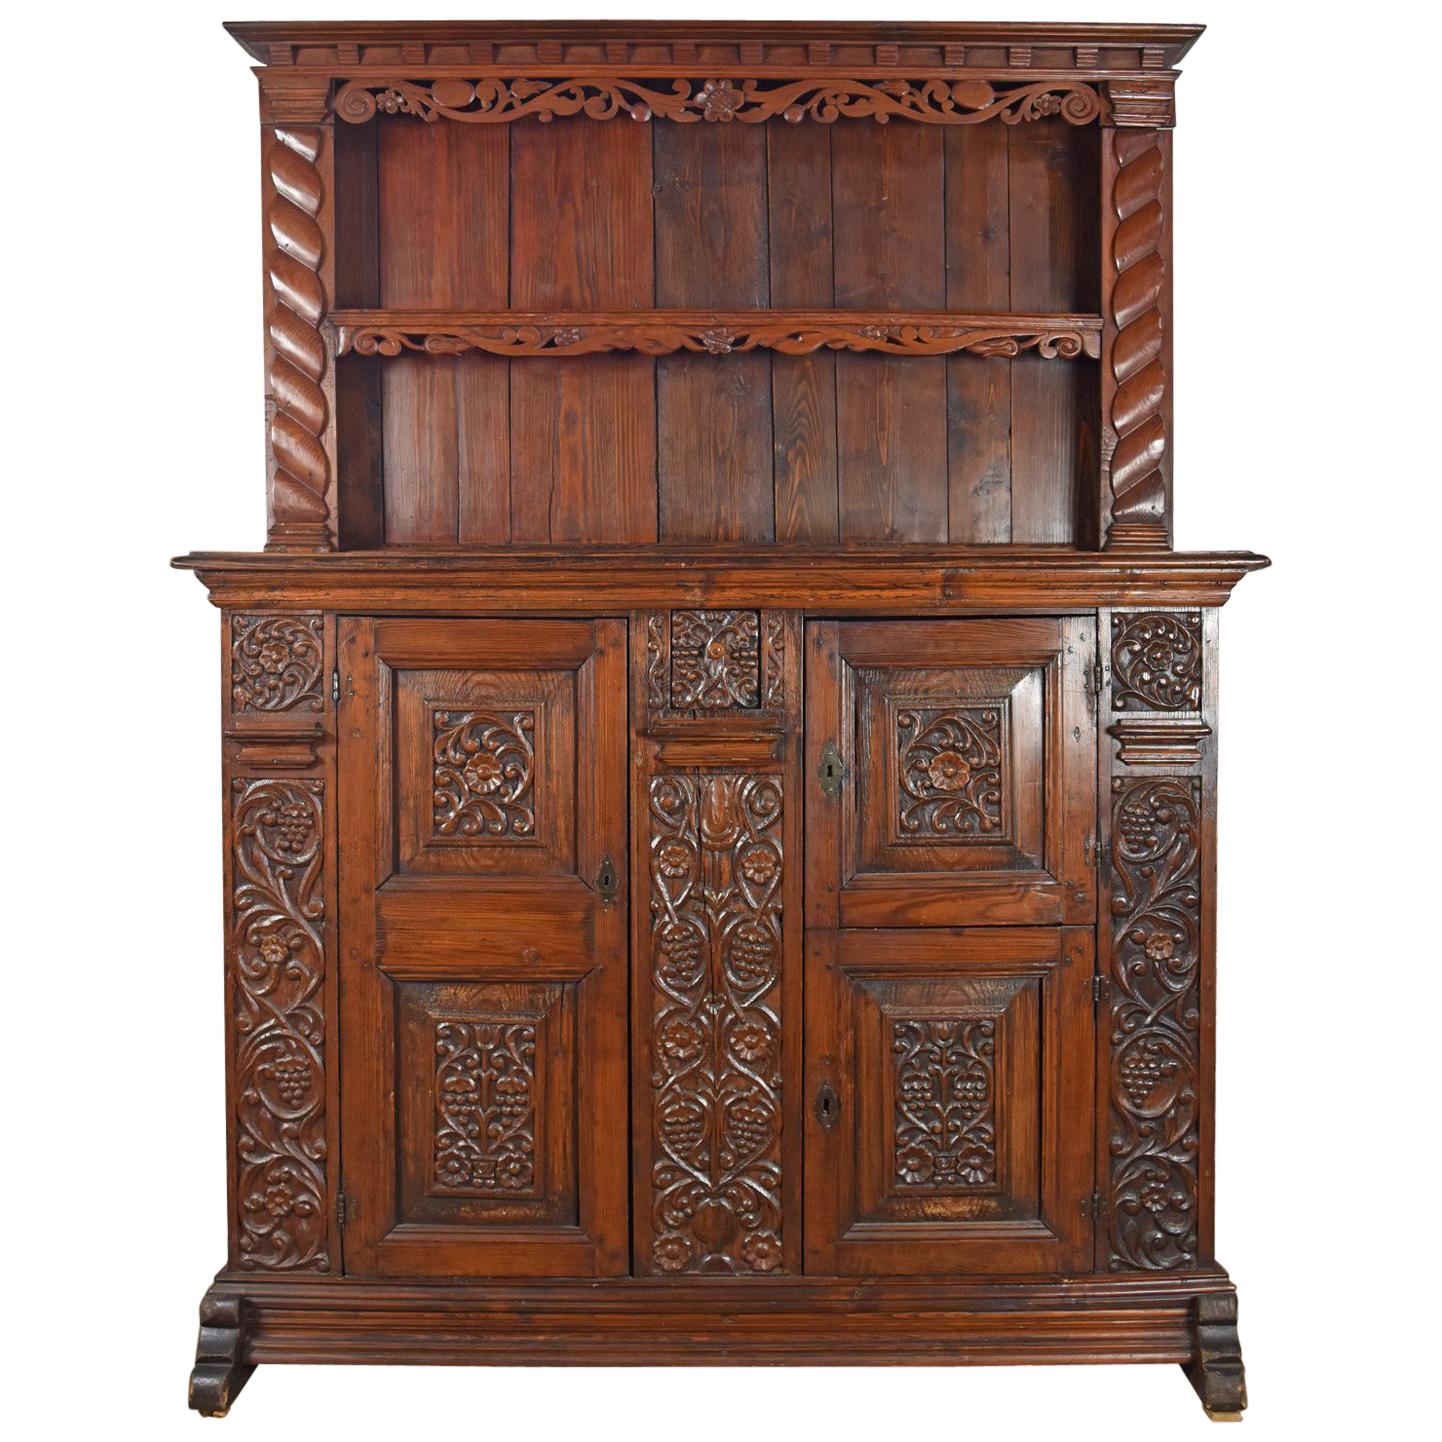 German / Lower Rhine 18th Century Carved Pine Cabinet with Dish-Rack